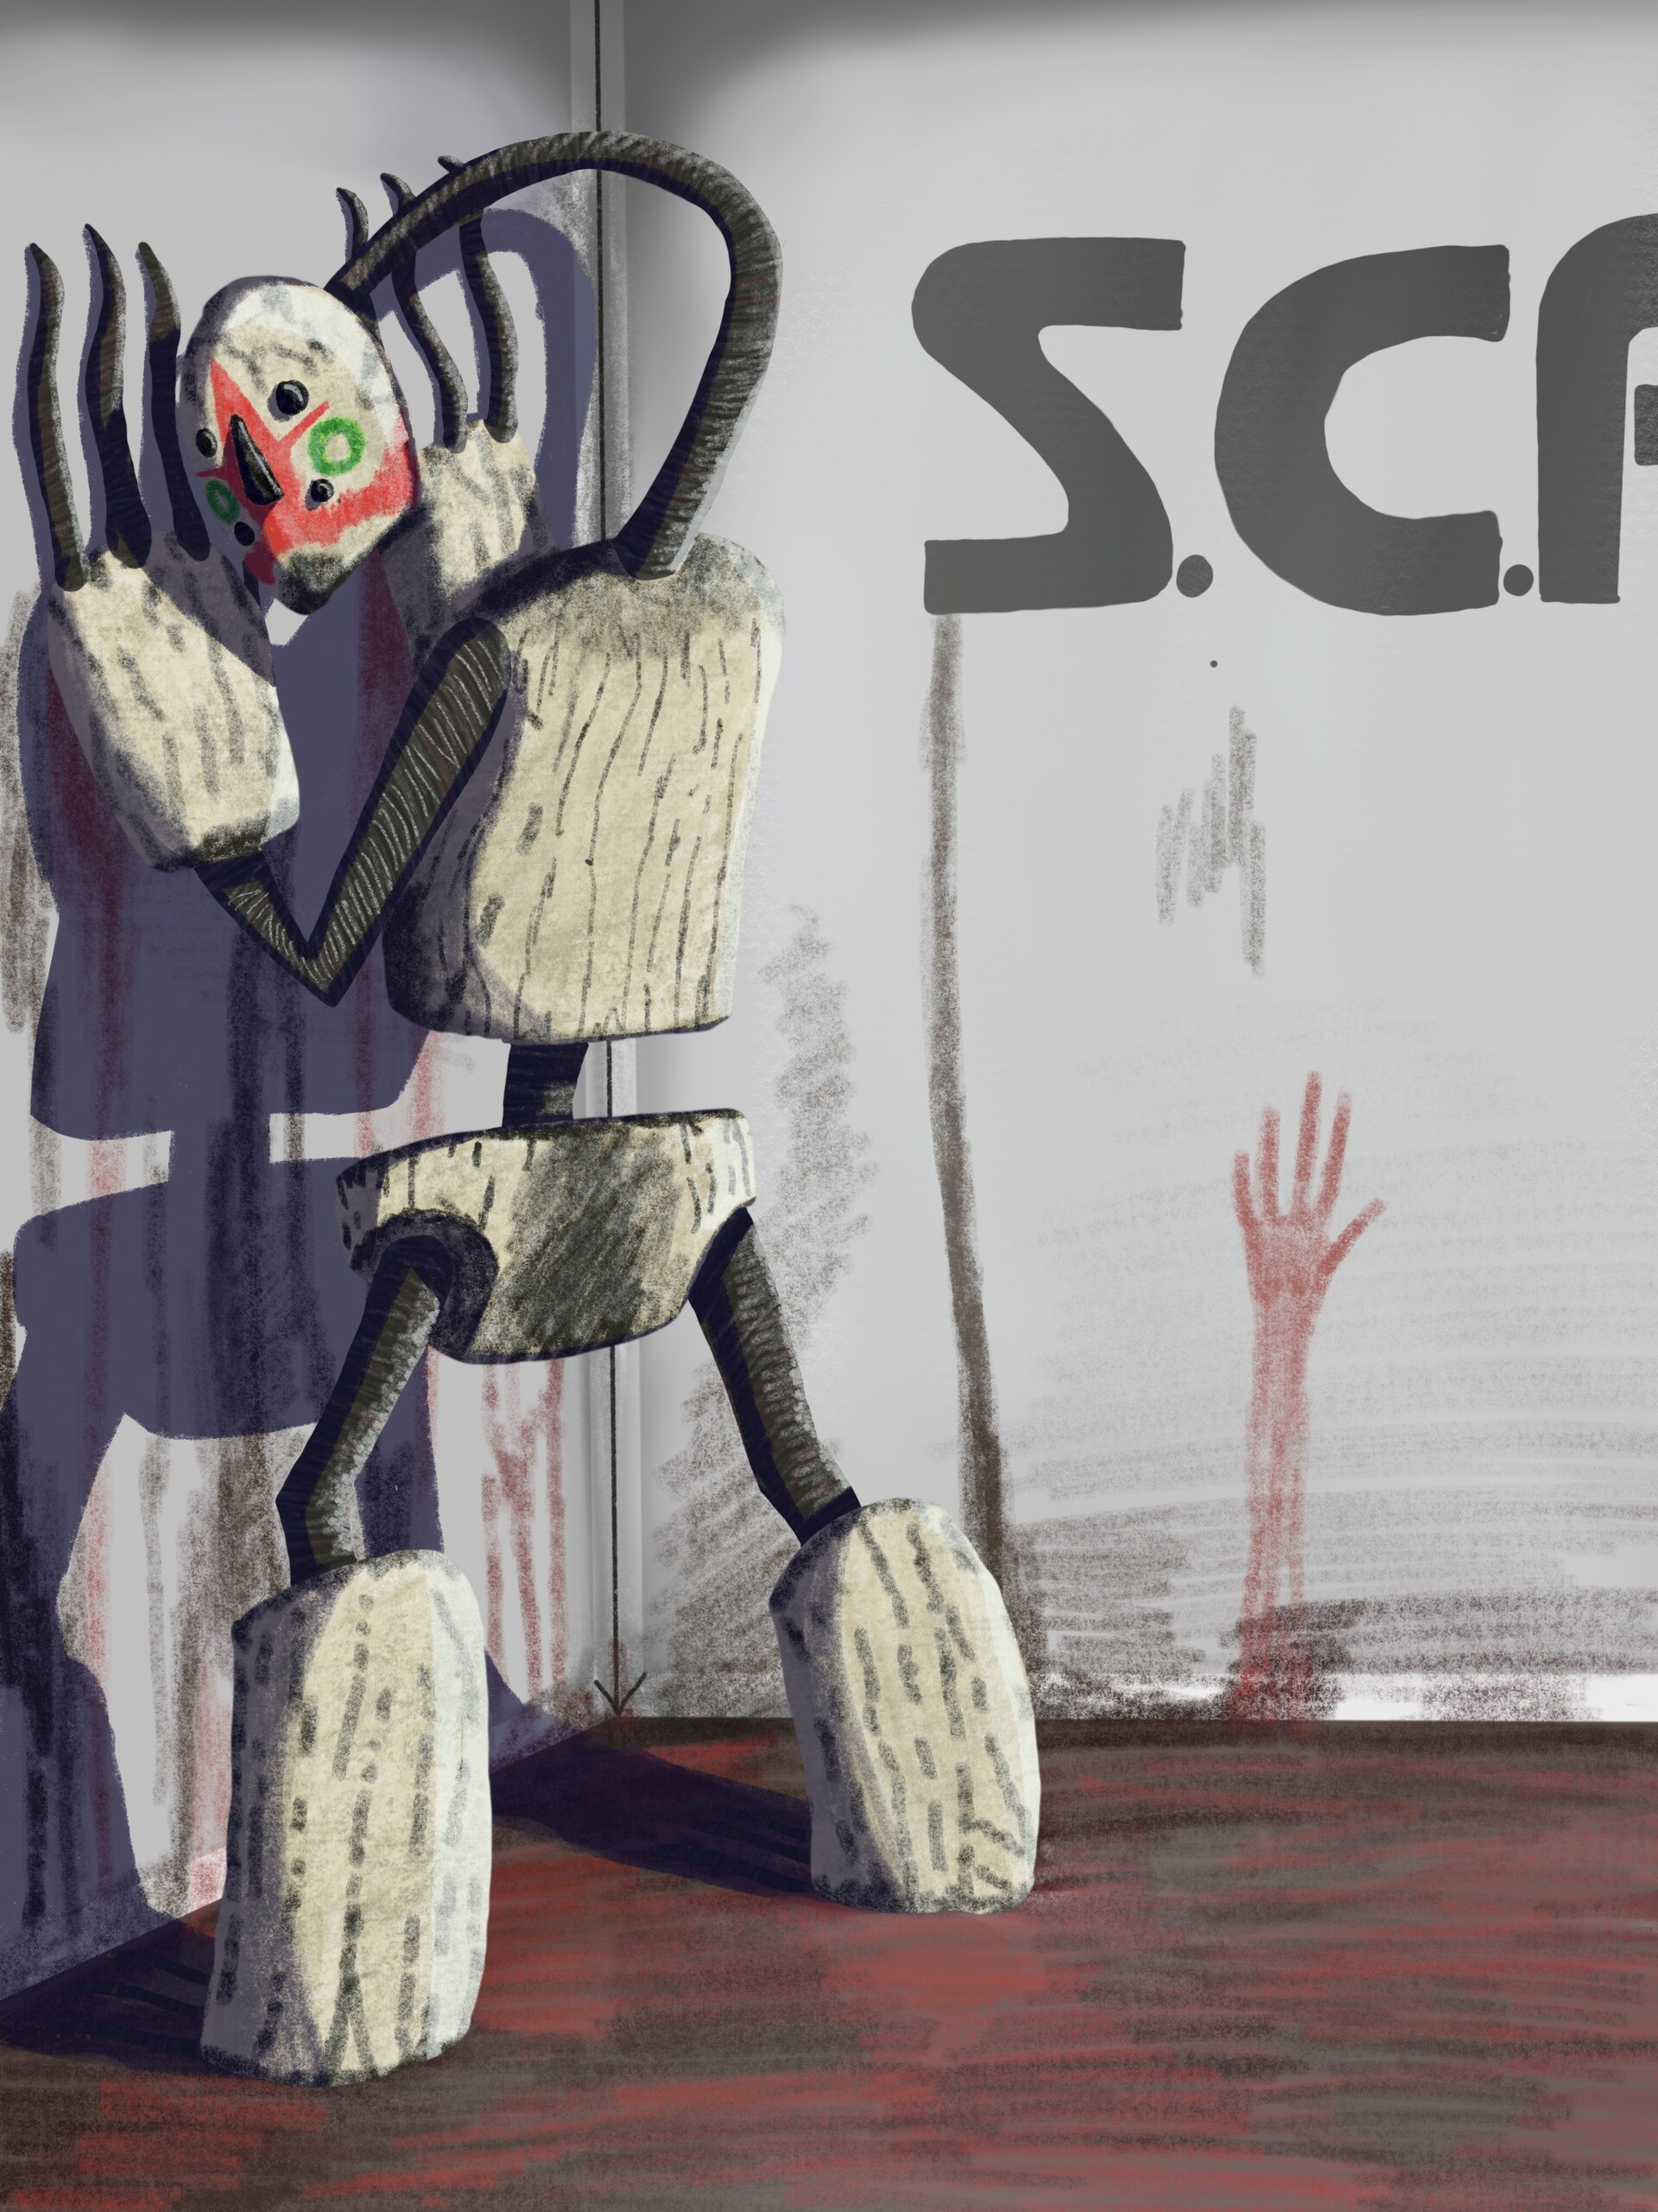 Scp 173 